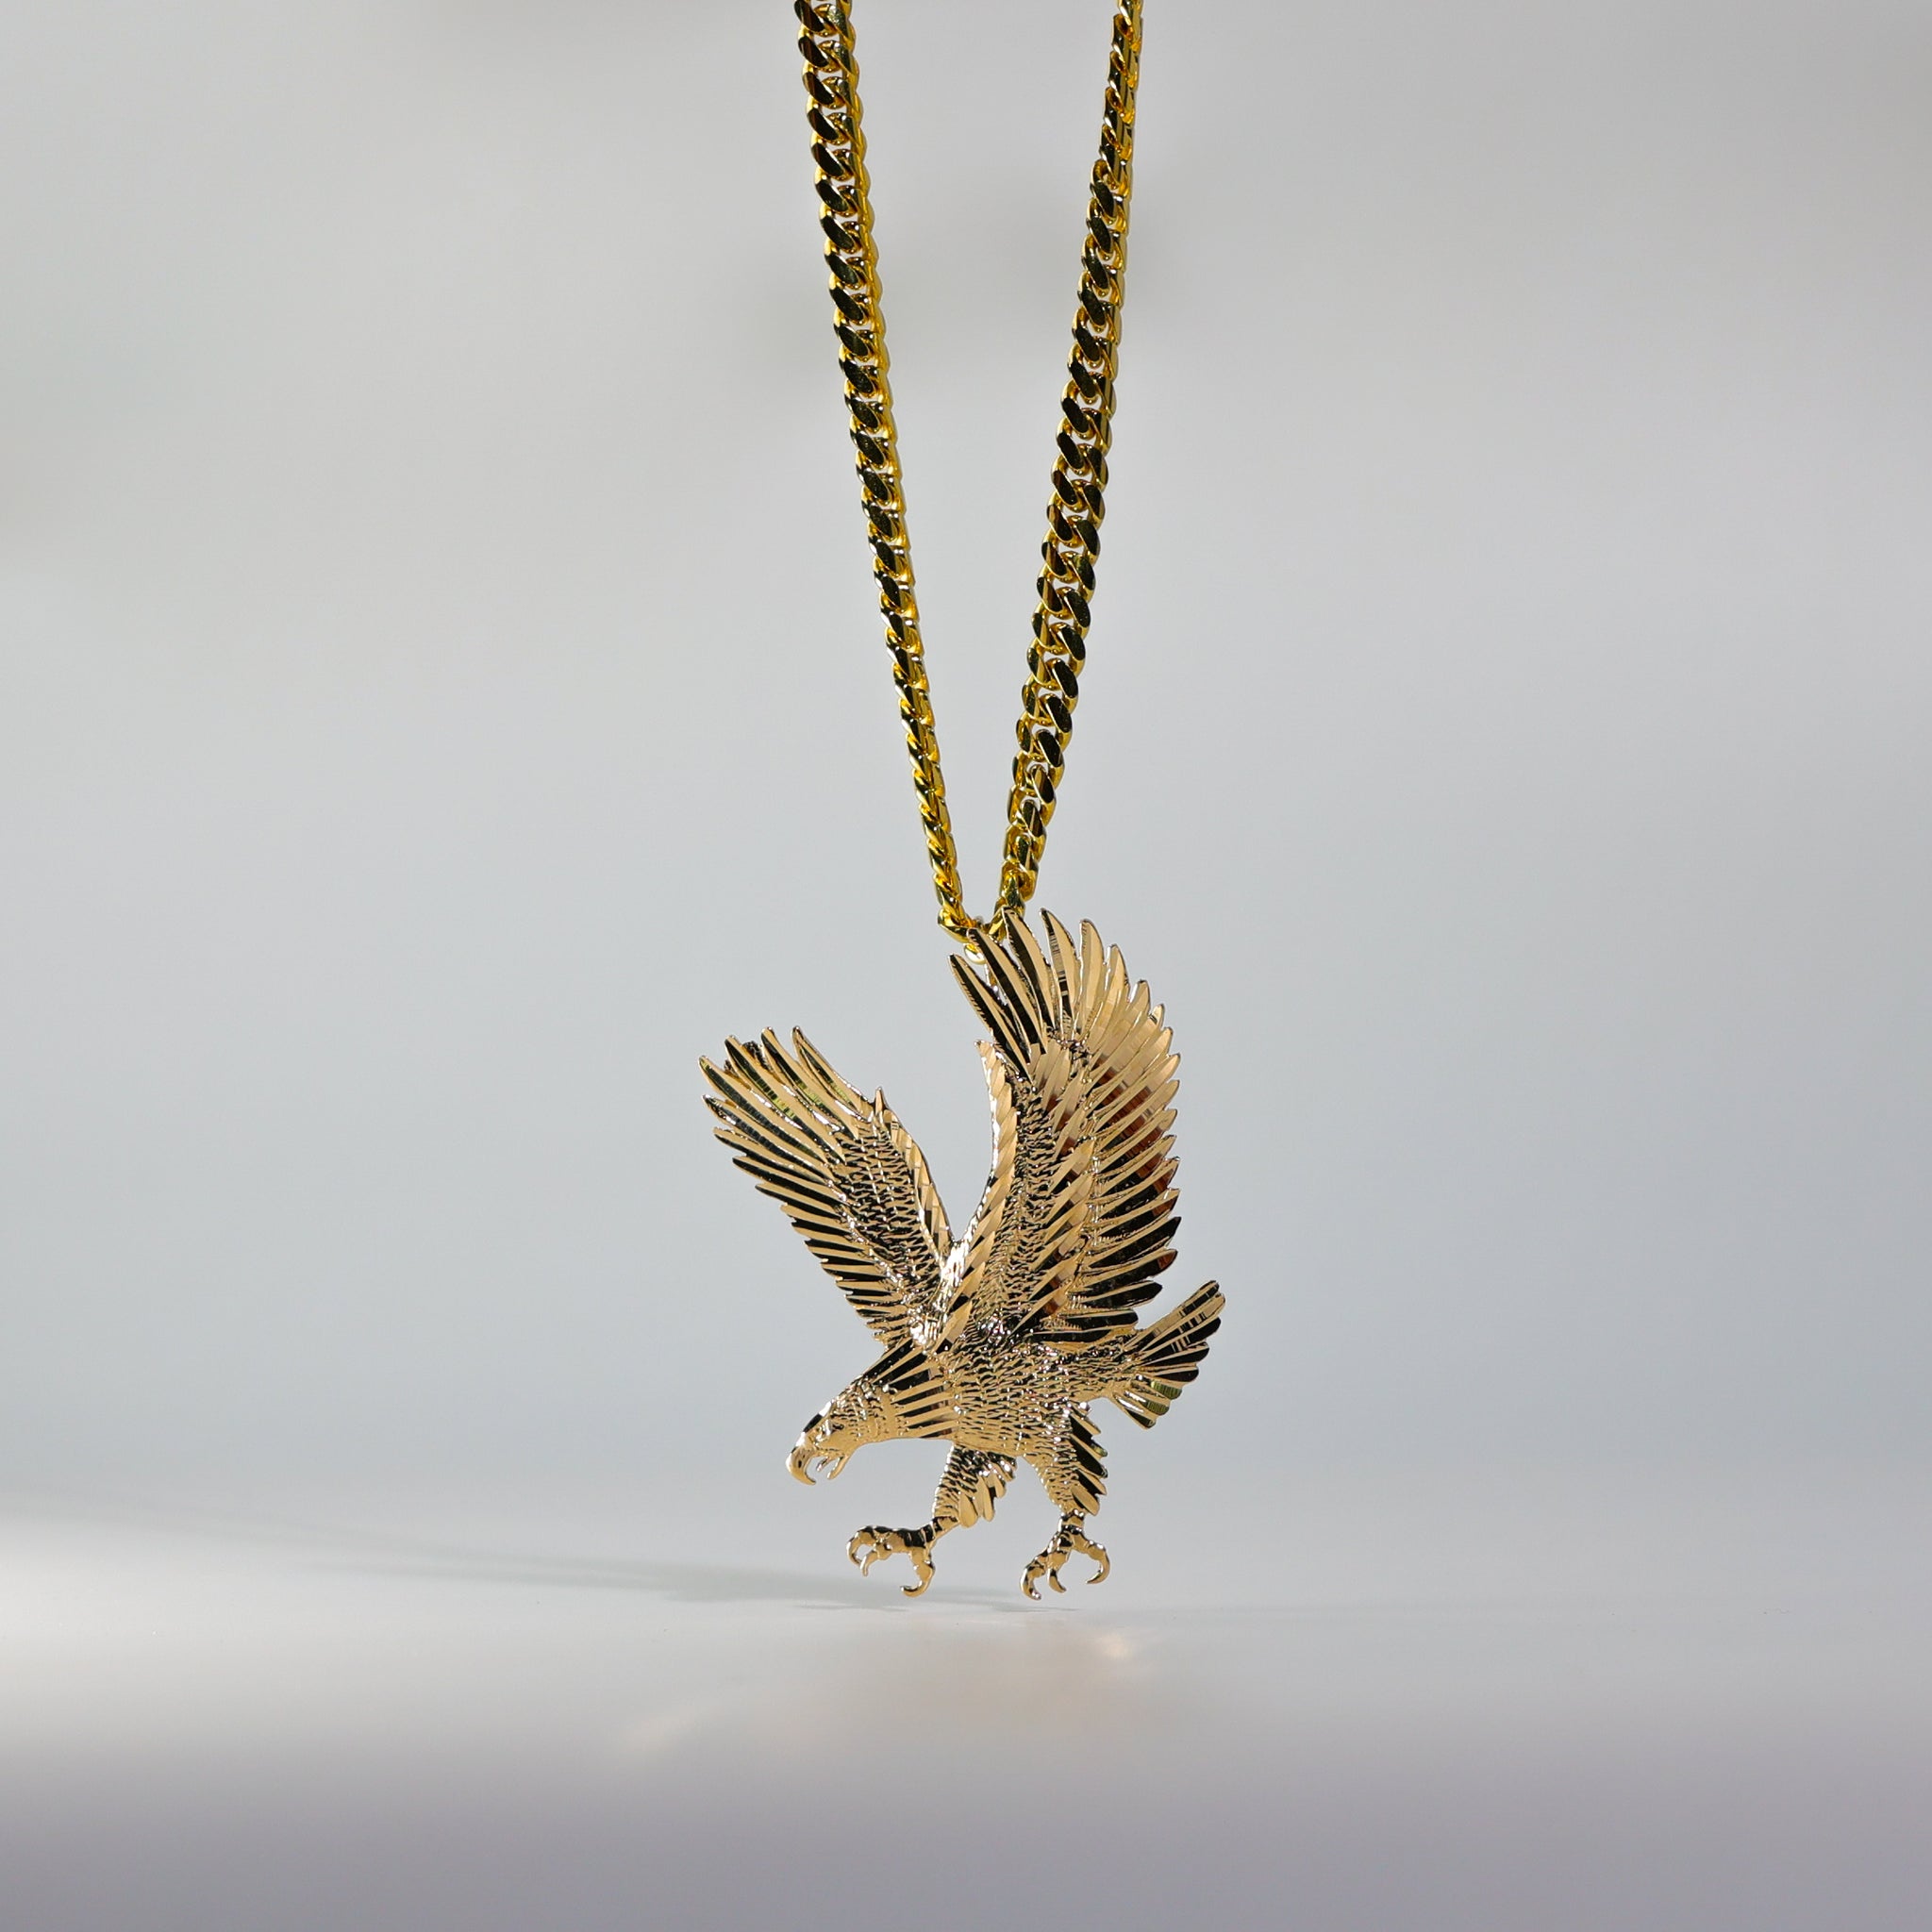 Gold Eagle Pendant Model-1591 - Charlie & Co. Jewelry